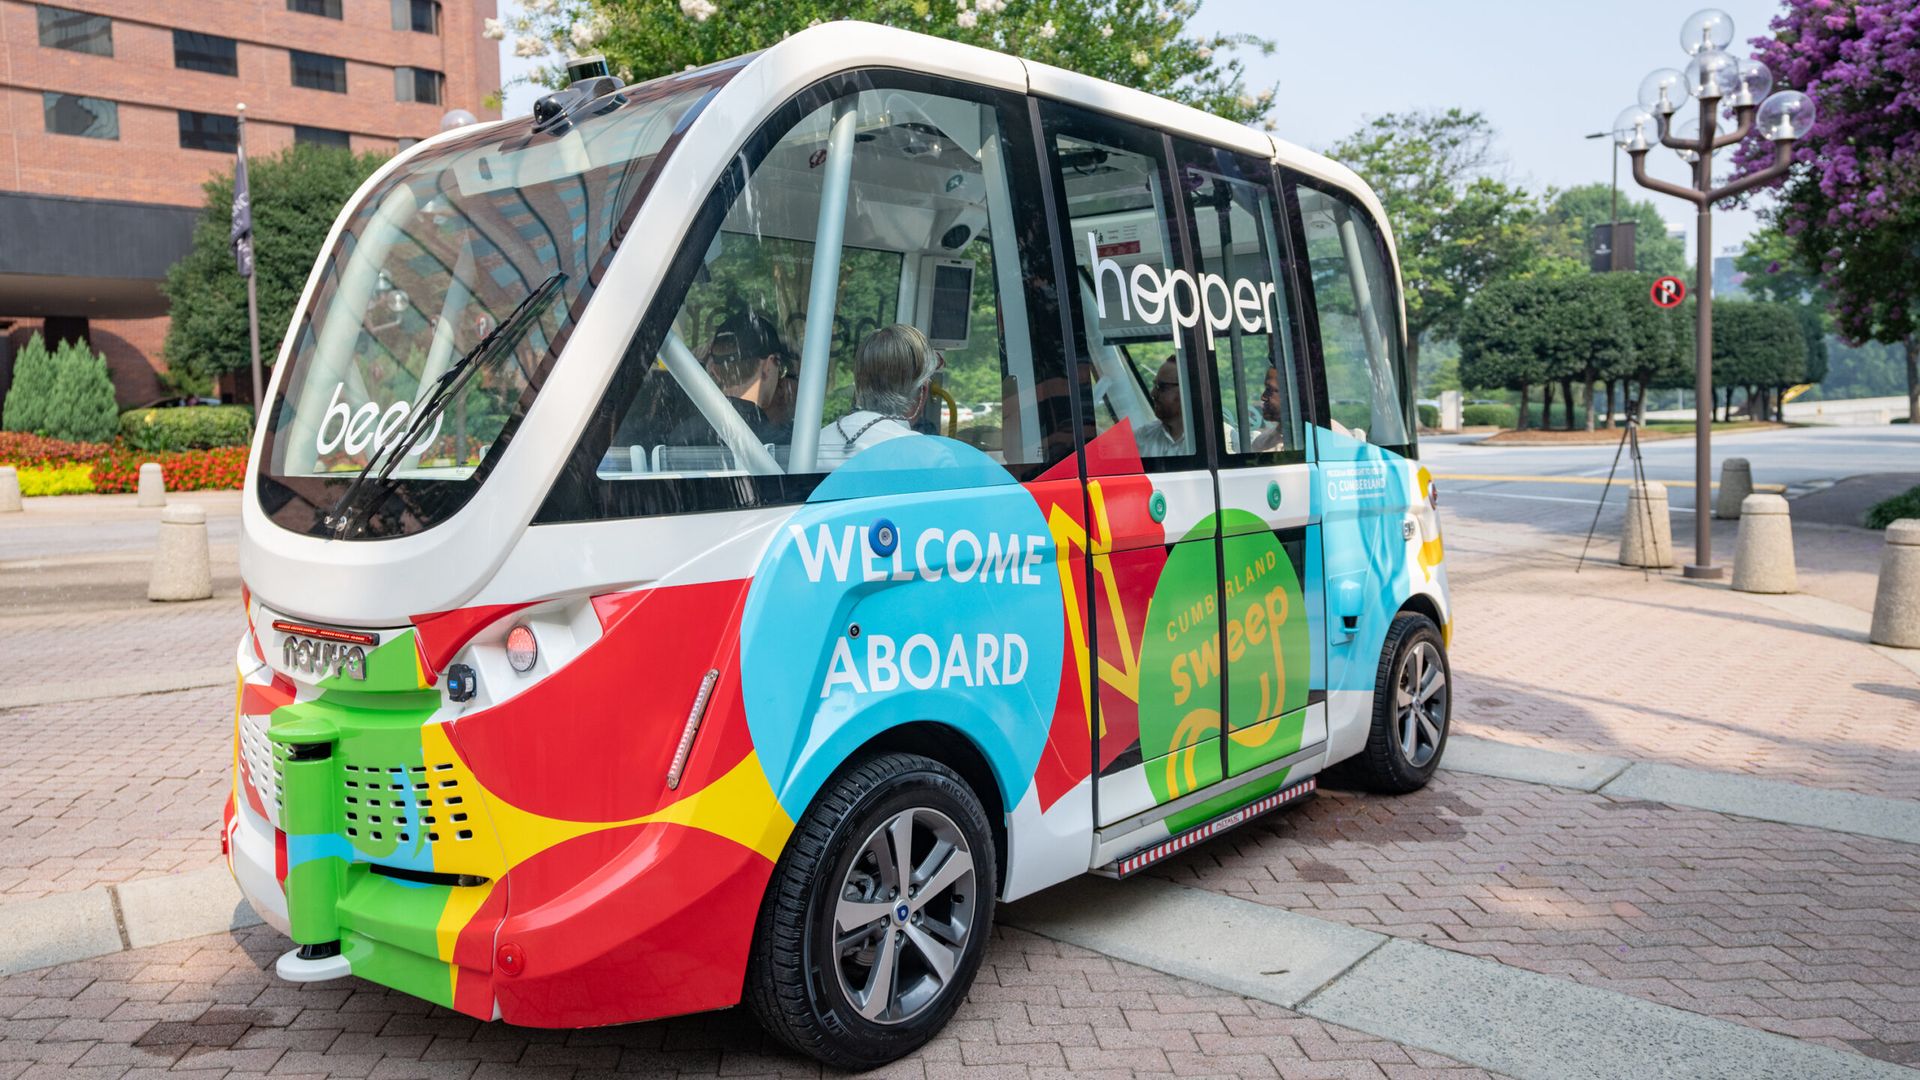 A brightly colored 8-person autonomous shuttle with "Welcome aboard" and "hopper" on the side